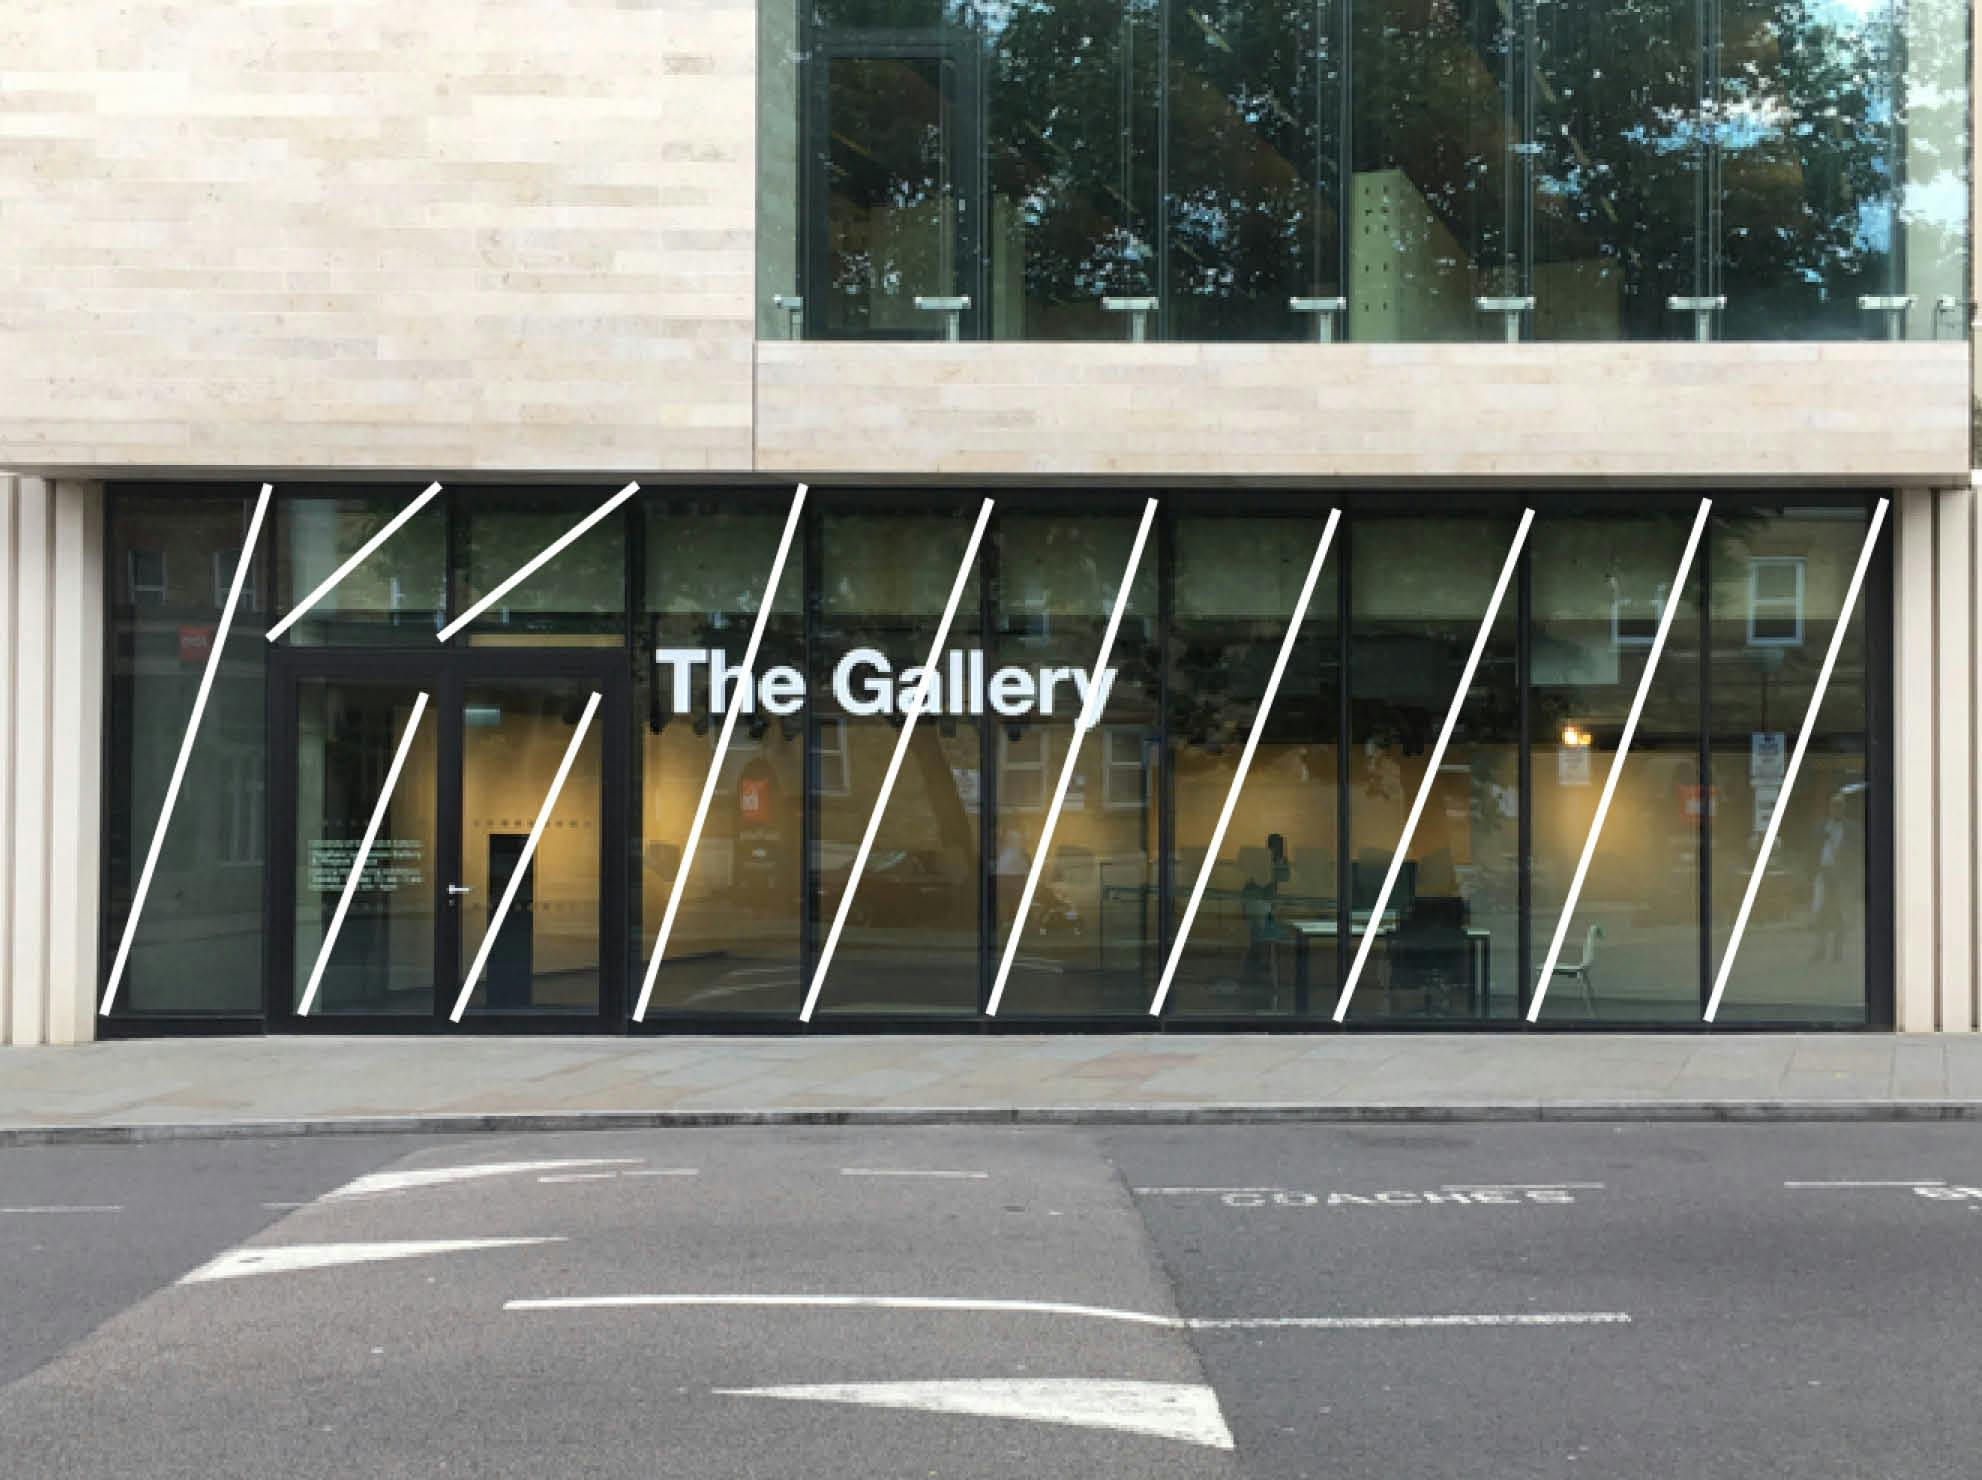 'Telon', vinyl artwork by Henry Coleman installed for the exhibition Plan-Unplan Stephen Lawrence Gallery Greenwich, London, diagonal vinyl strips run diagonally  left to right from corner to corner of each pain of glass across the face of the gallery